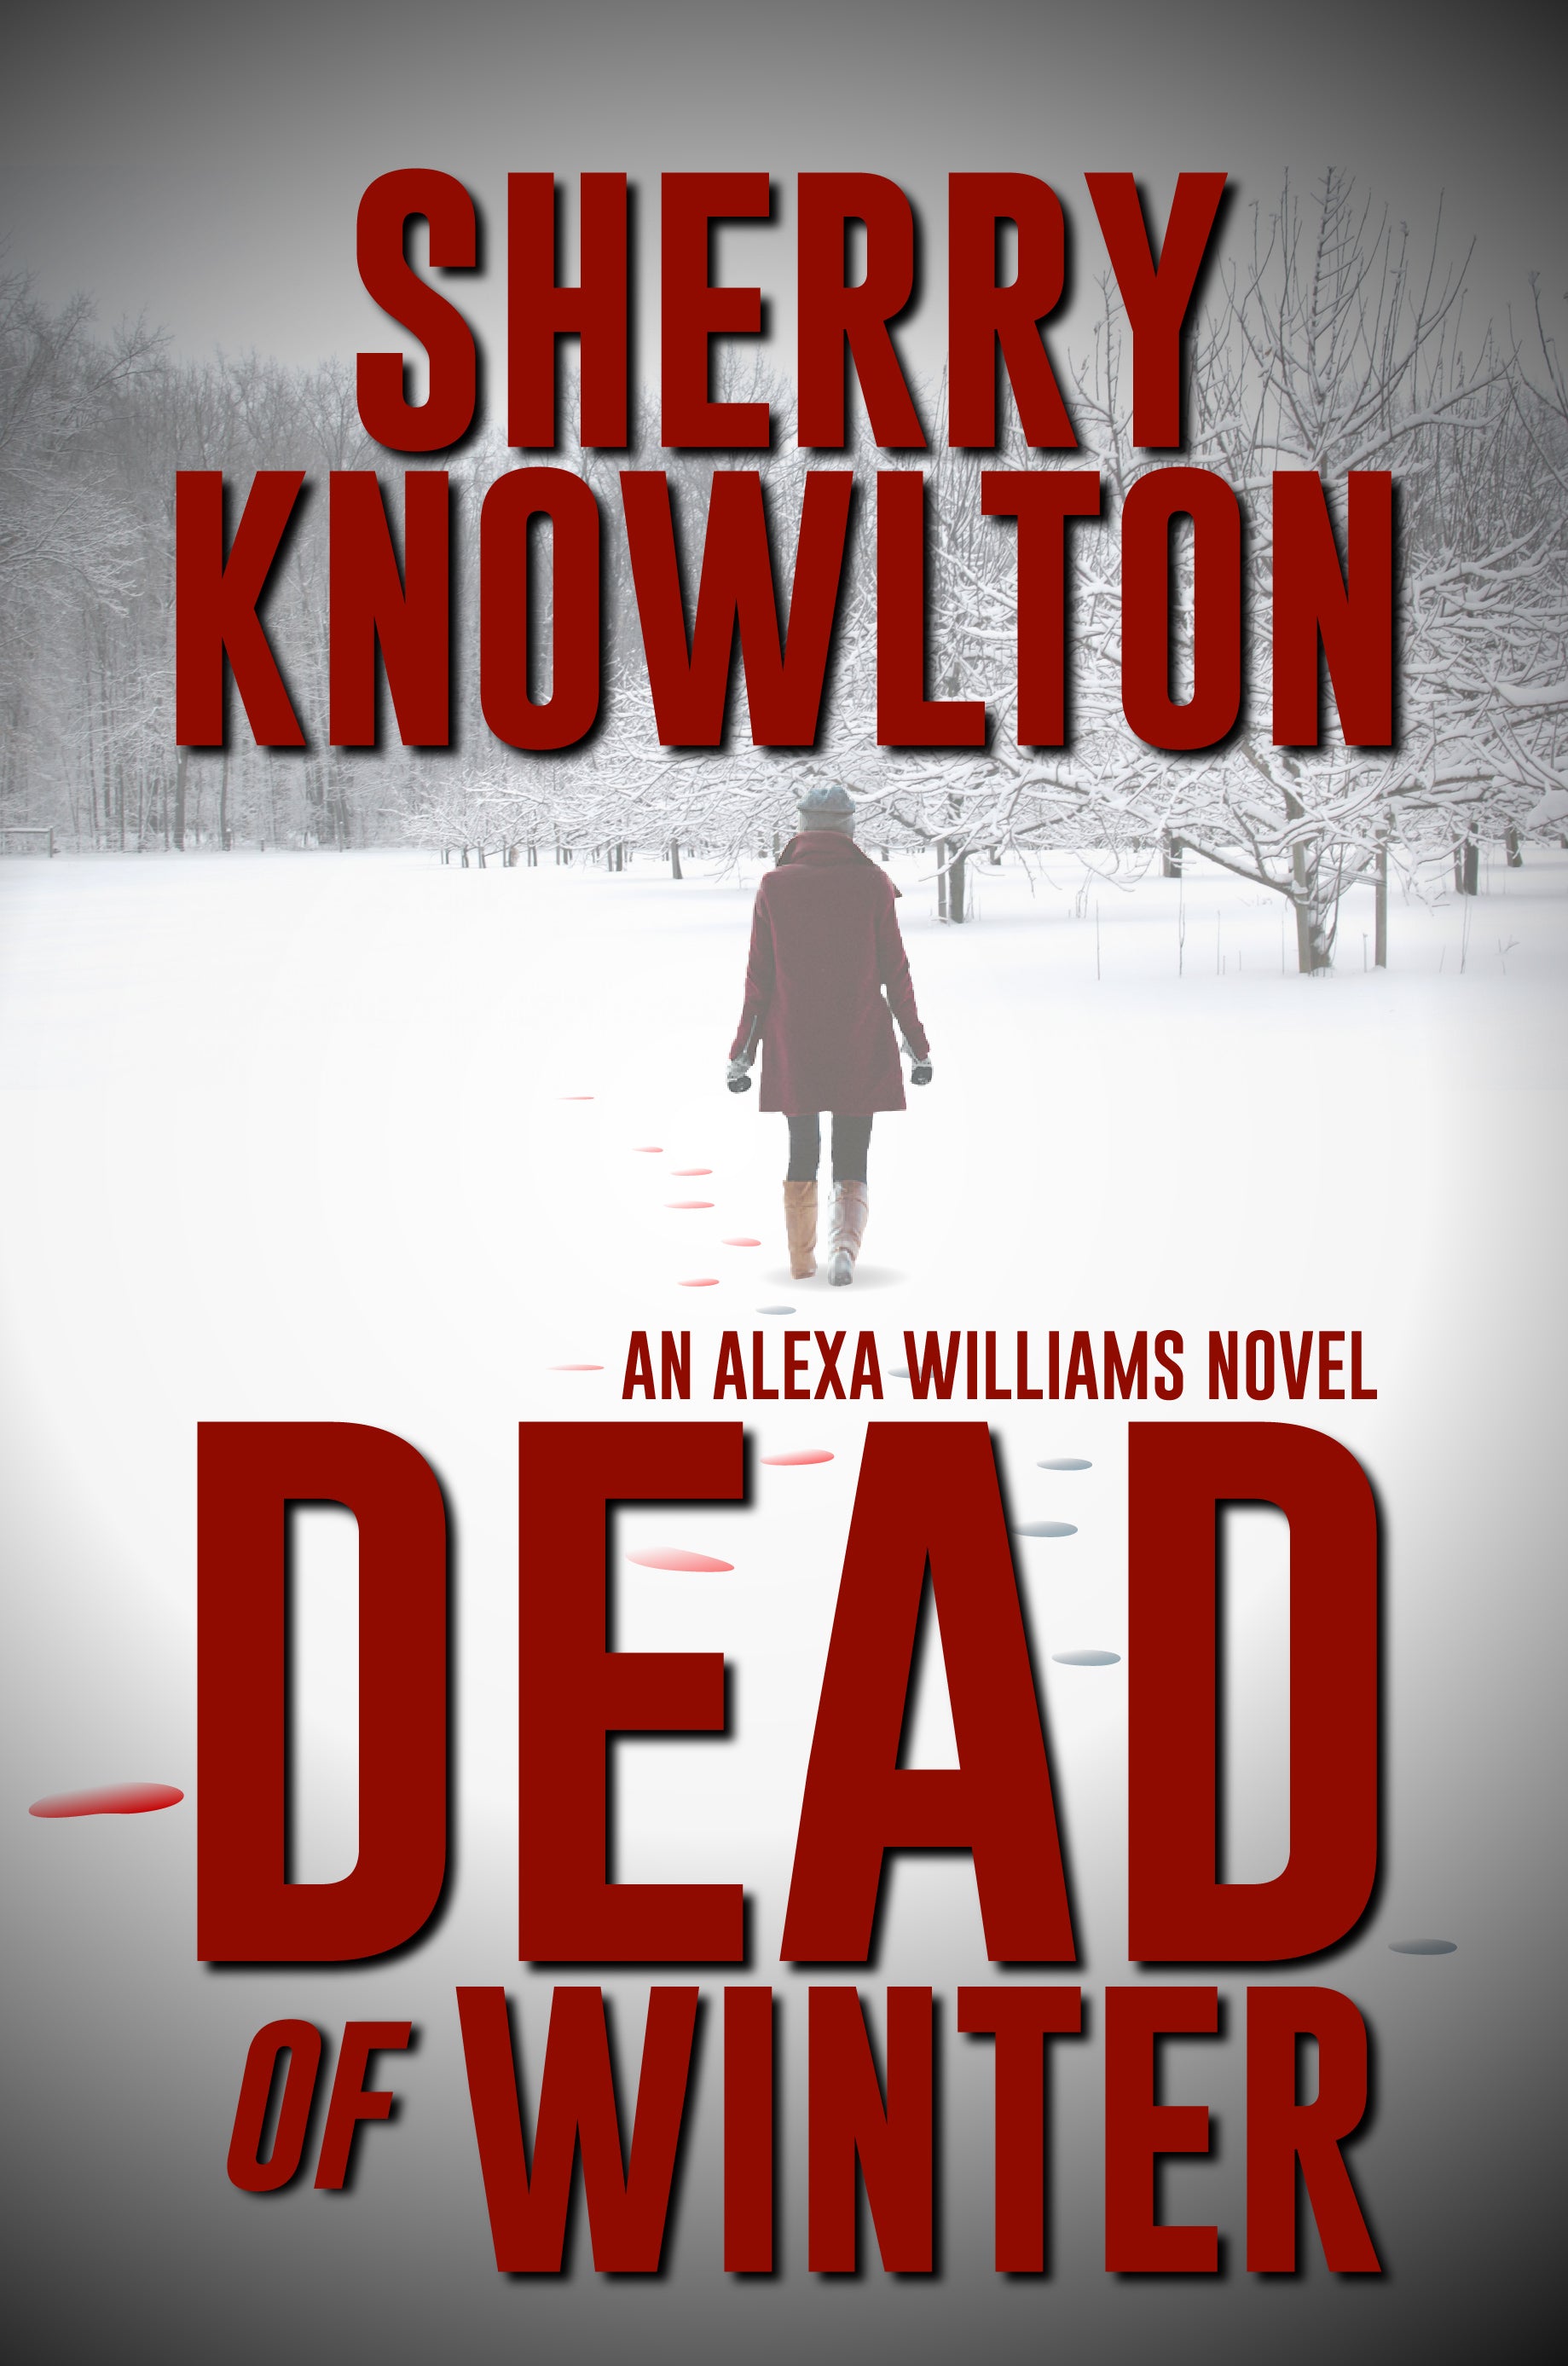 Sherry Knowlton’s “Dead of Winter” tops Milford House Press bestsellers for February